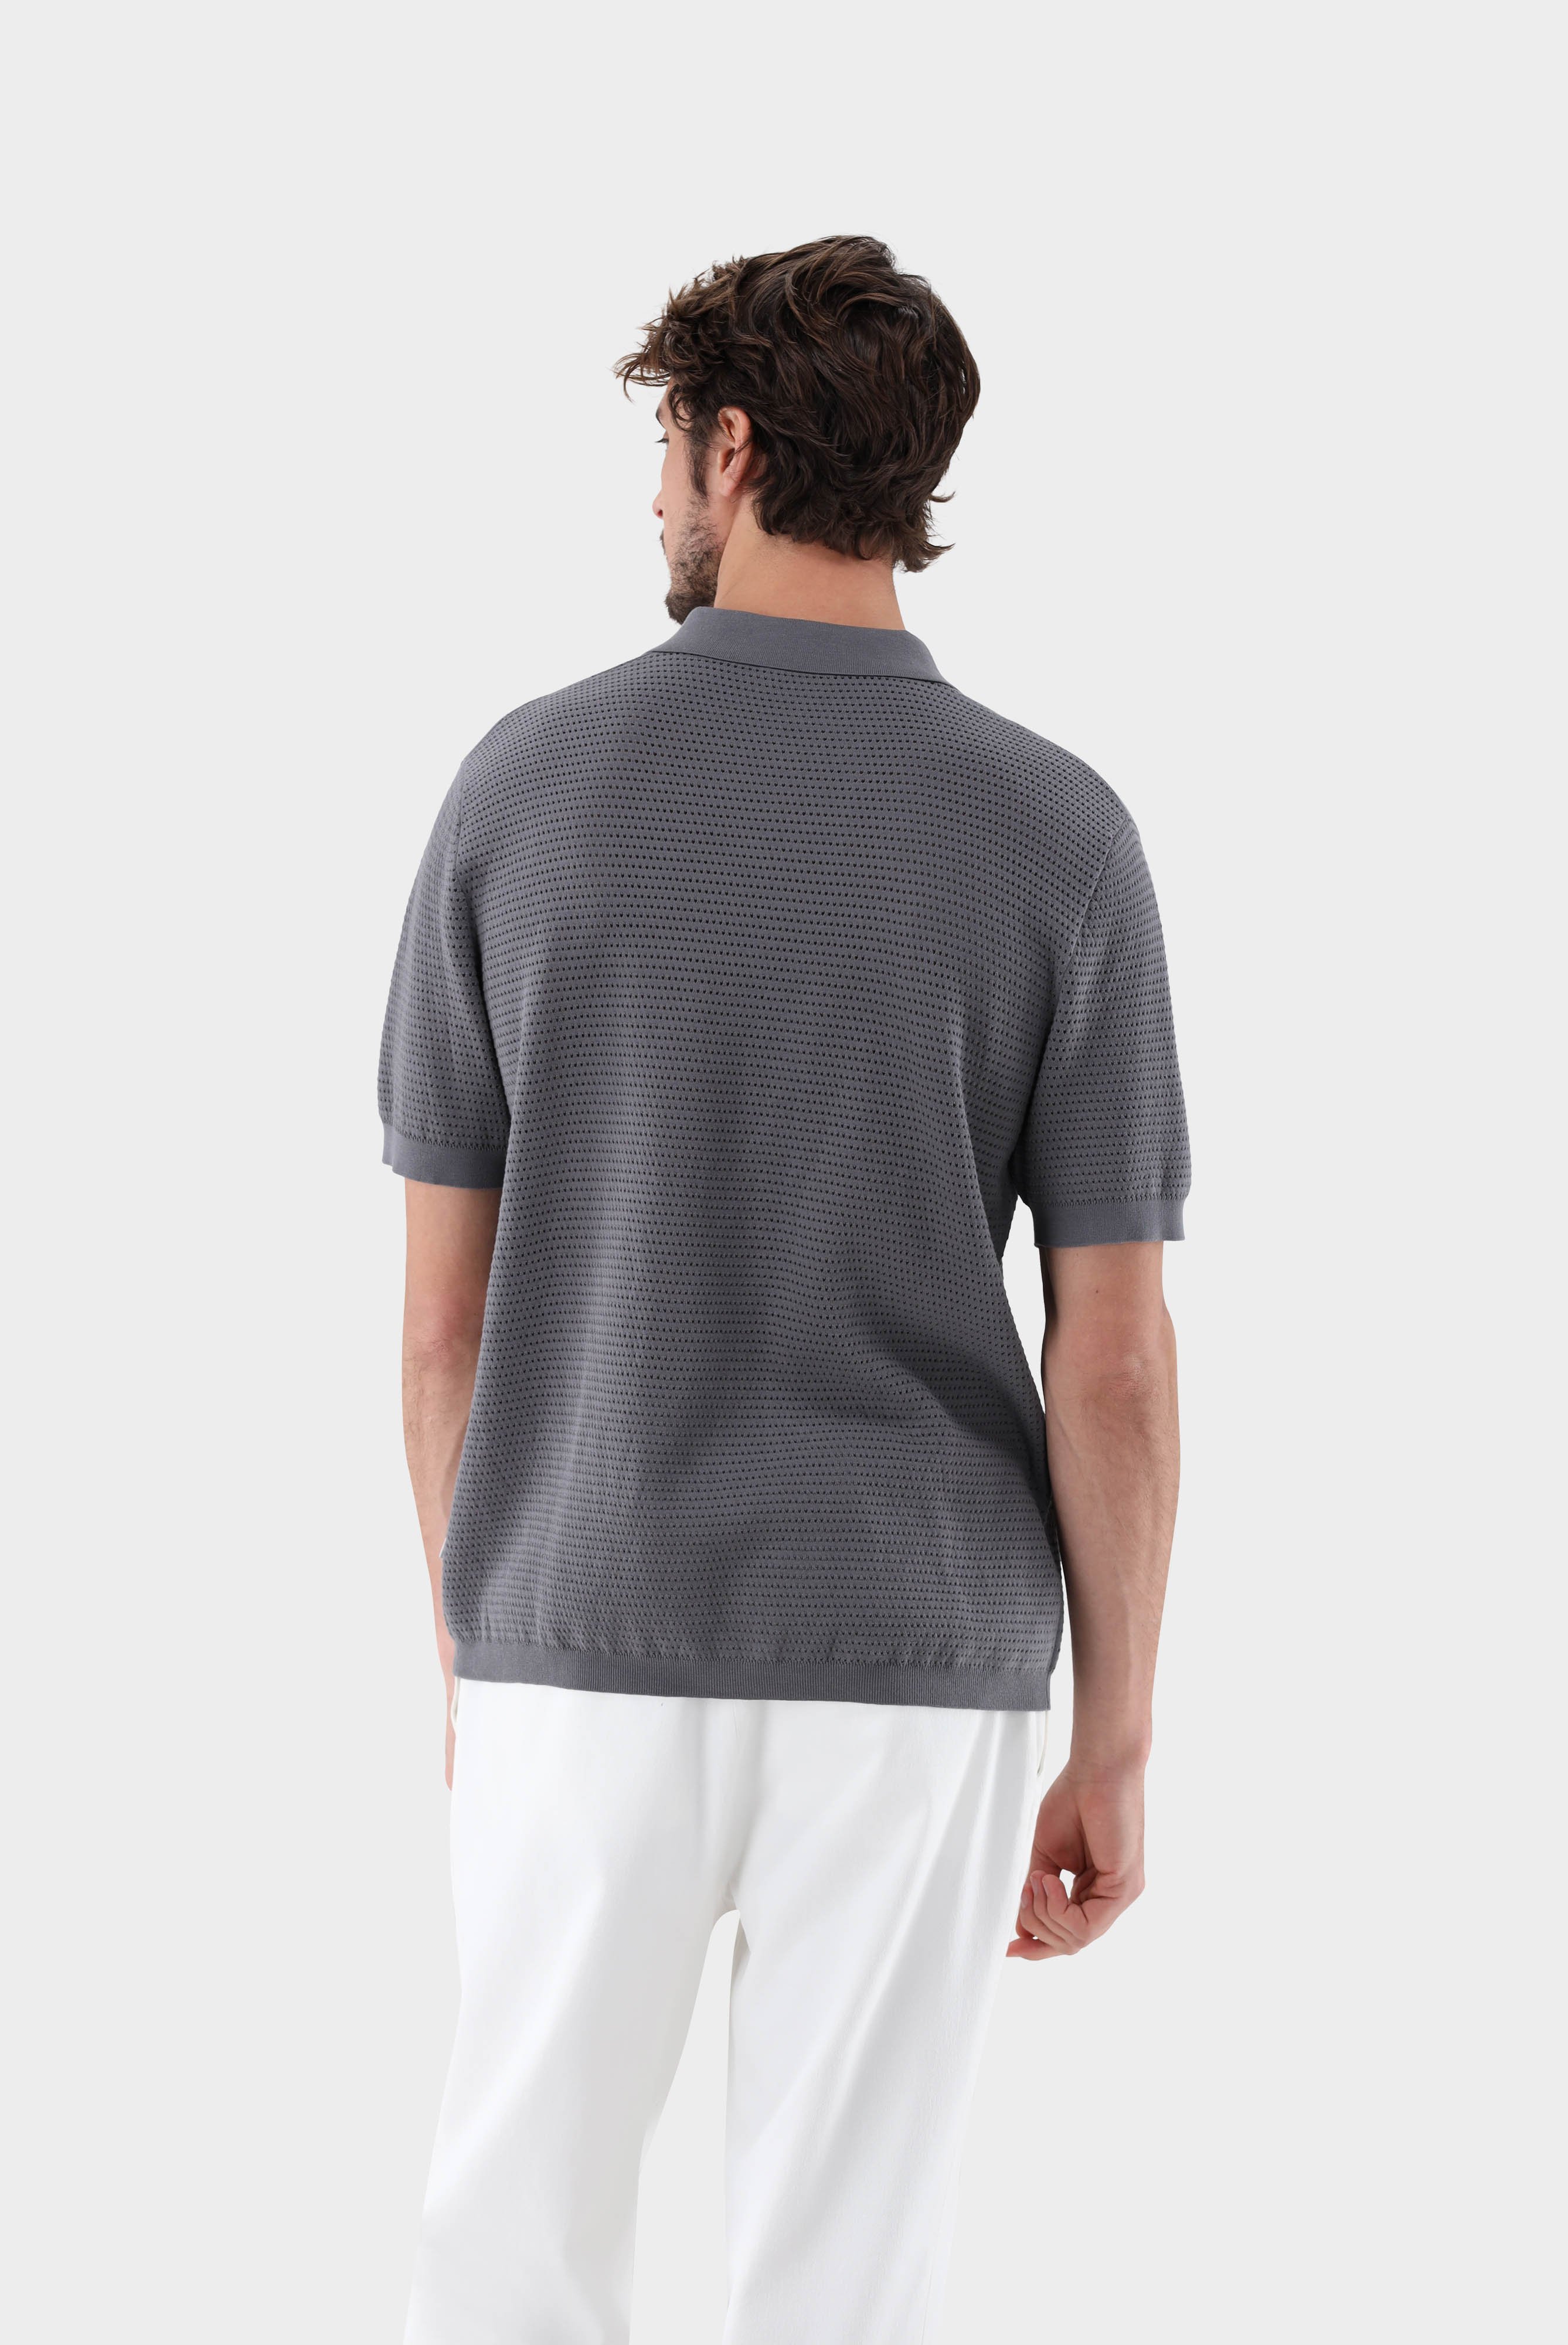 Poloshirts+Polo Shirt with Mesh Structure in Air Cotton+82.8651..S00267.070.L